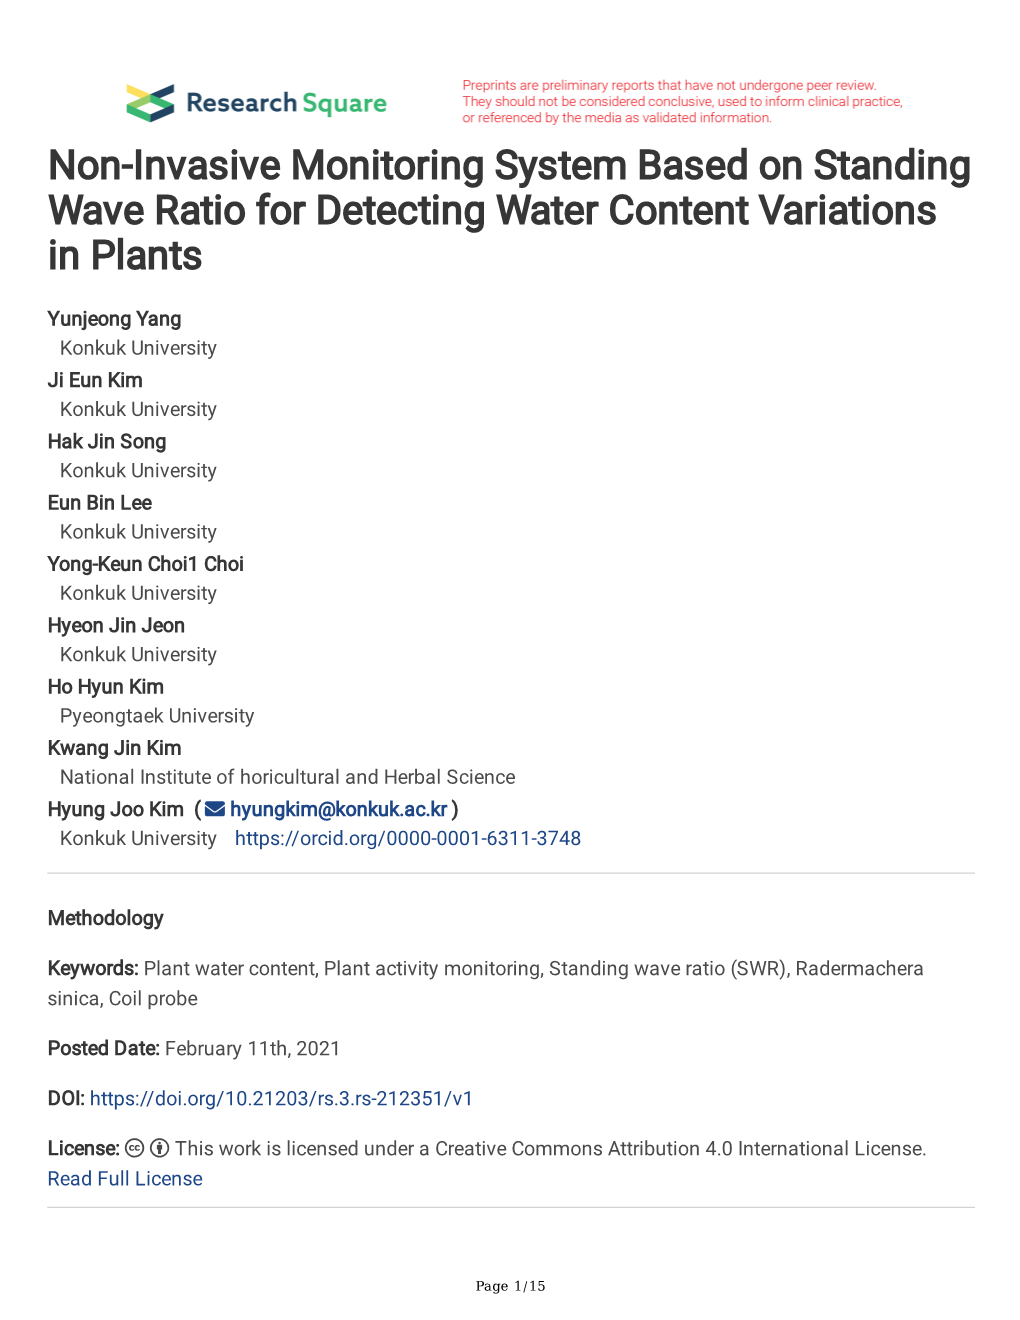 Non-Invasive Monitoring System Based on Standing Wave Ratio for Detecting Water Content Variations in Plants